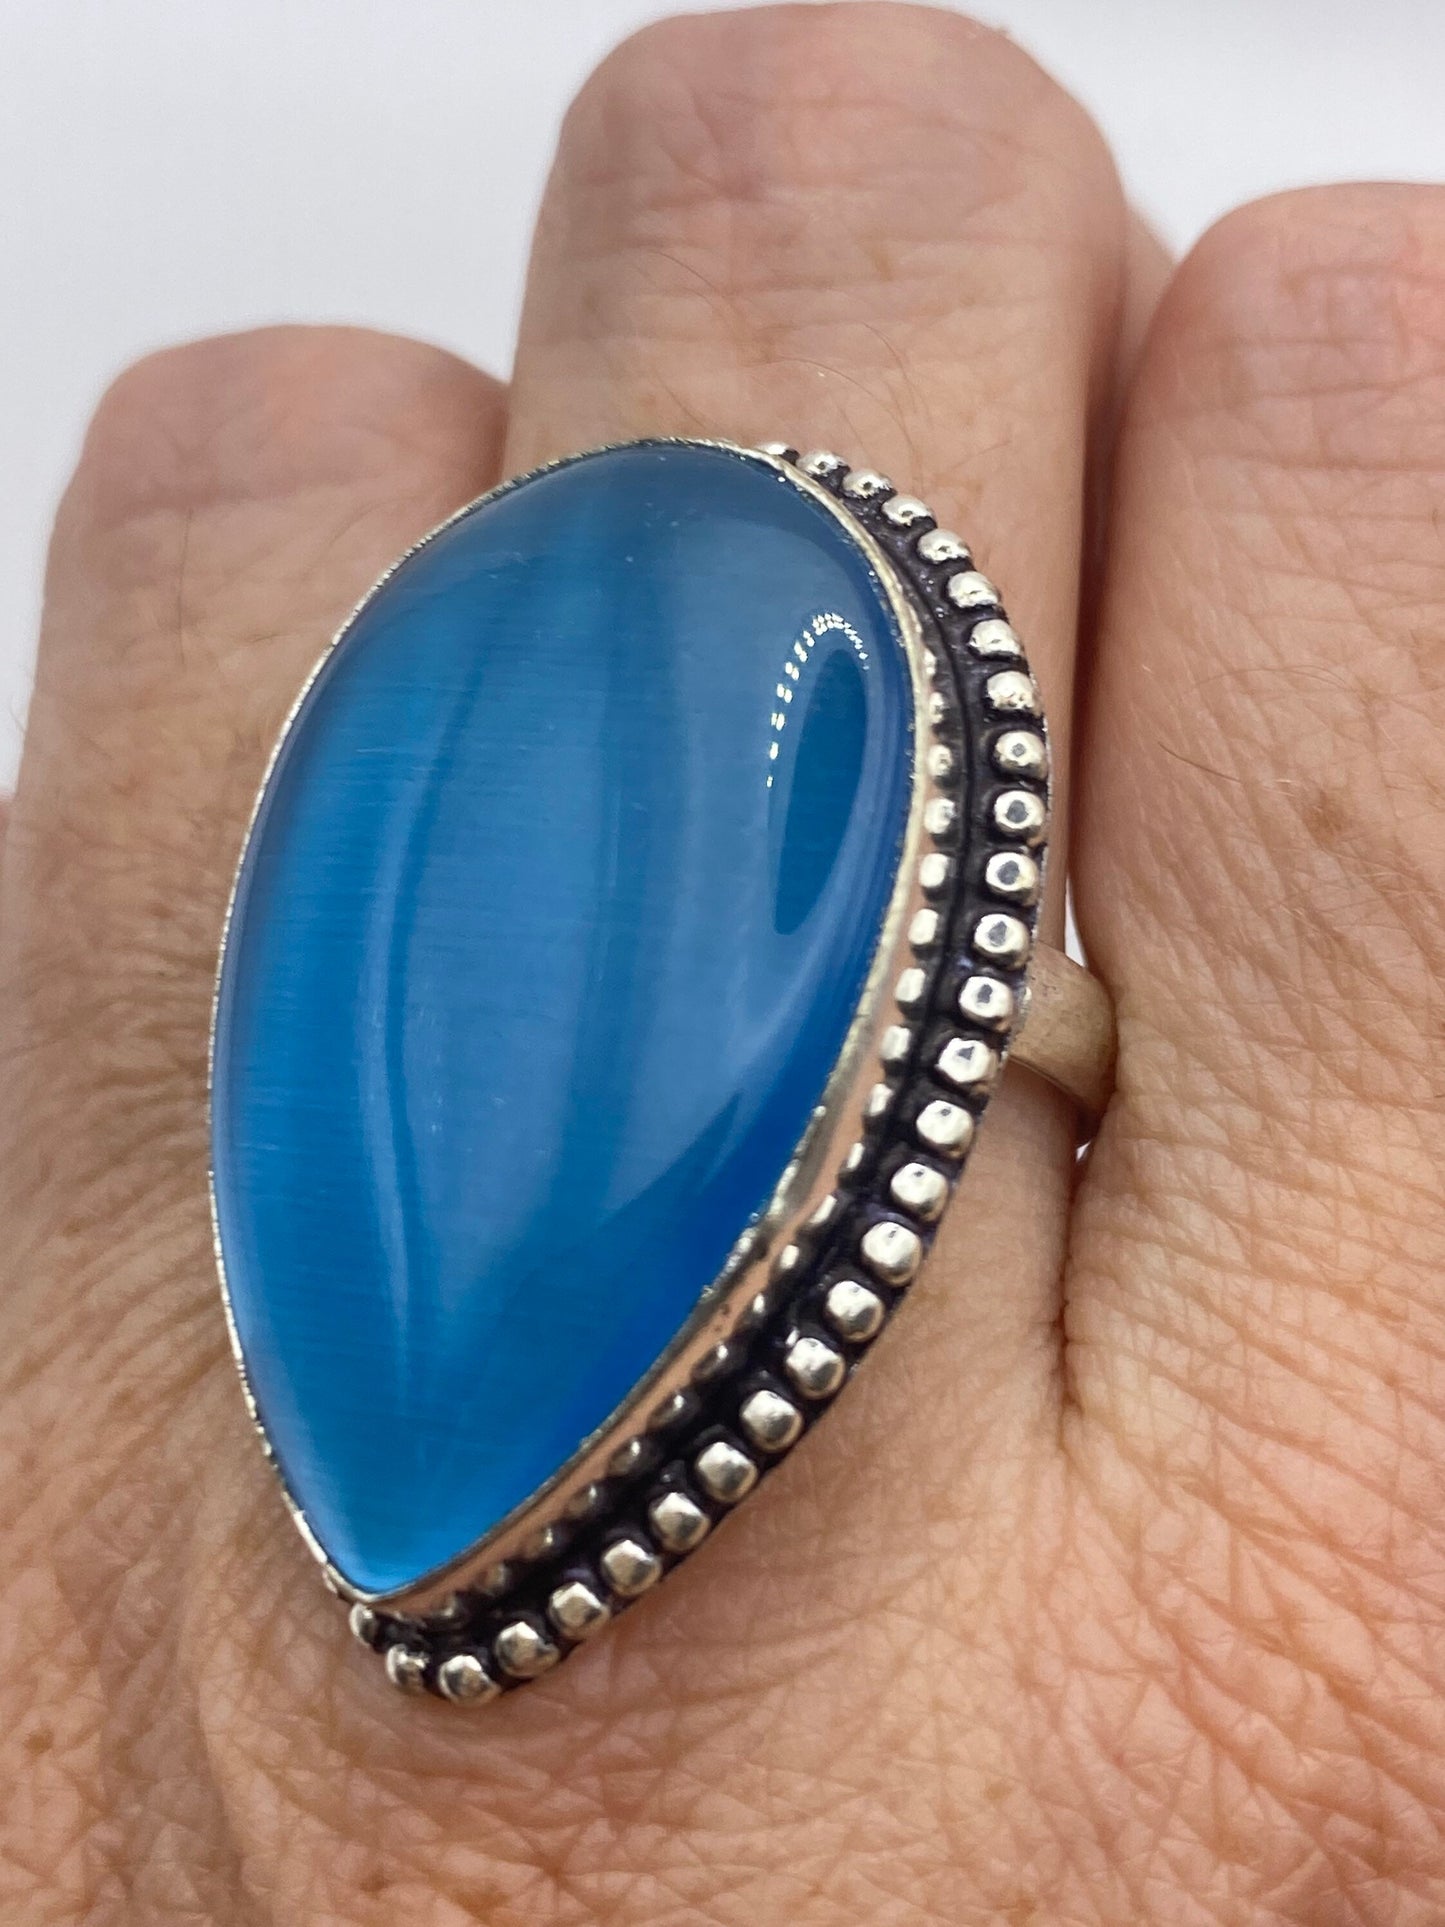 Vintage Blue Cats Eye Glass Ring